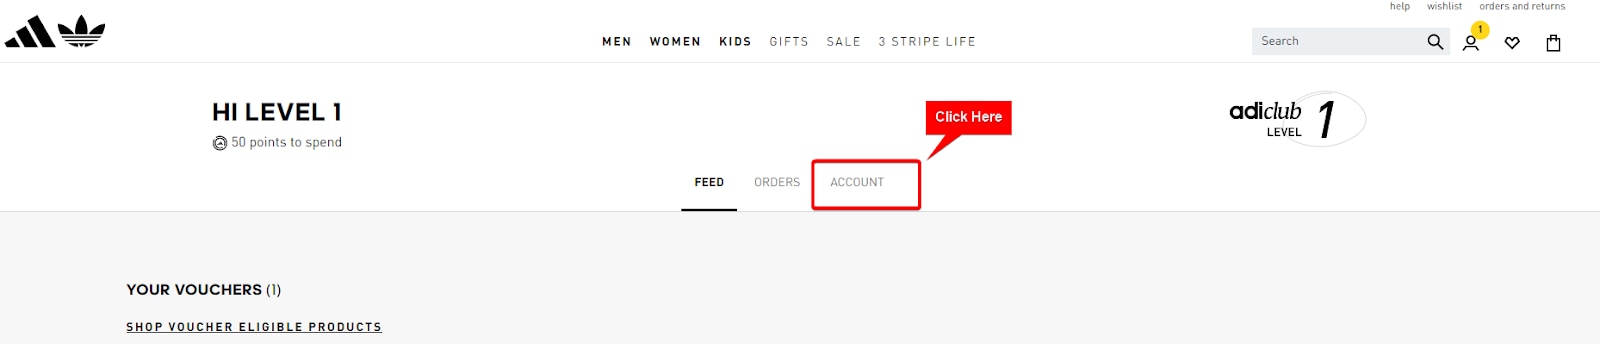 How to Ship Adidas Internationally in 3 Easy Steps 3